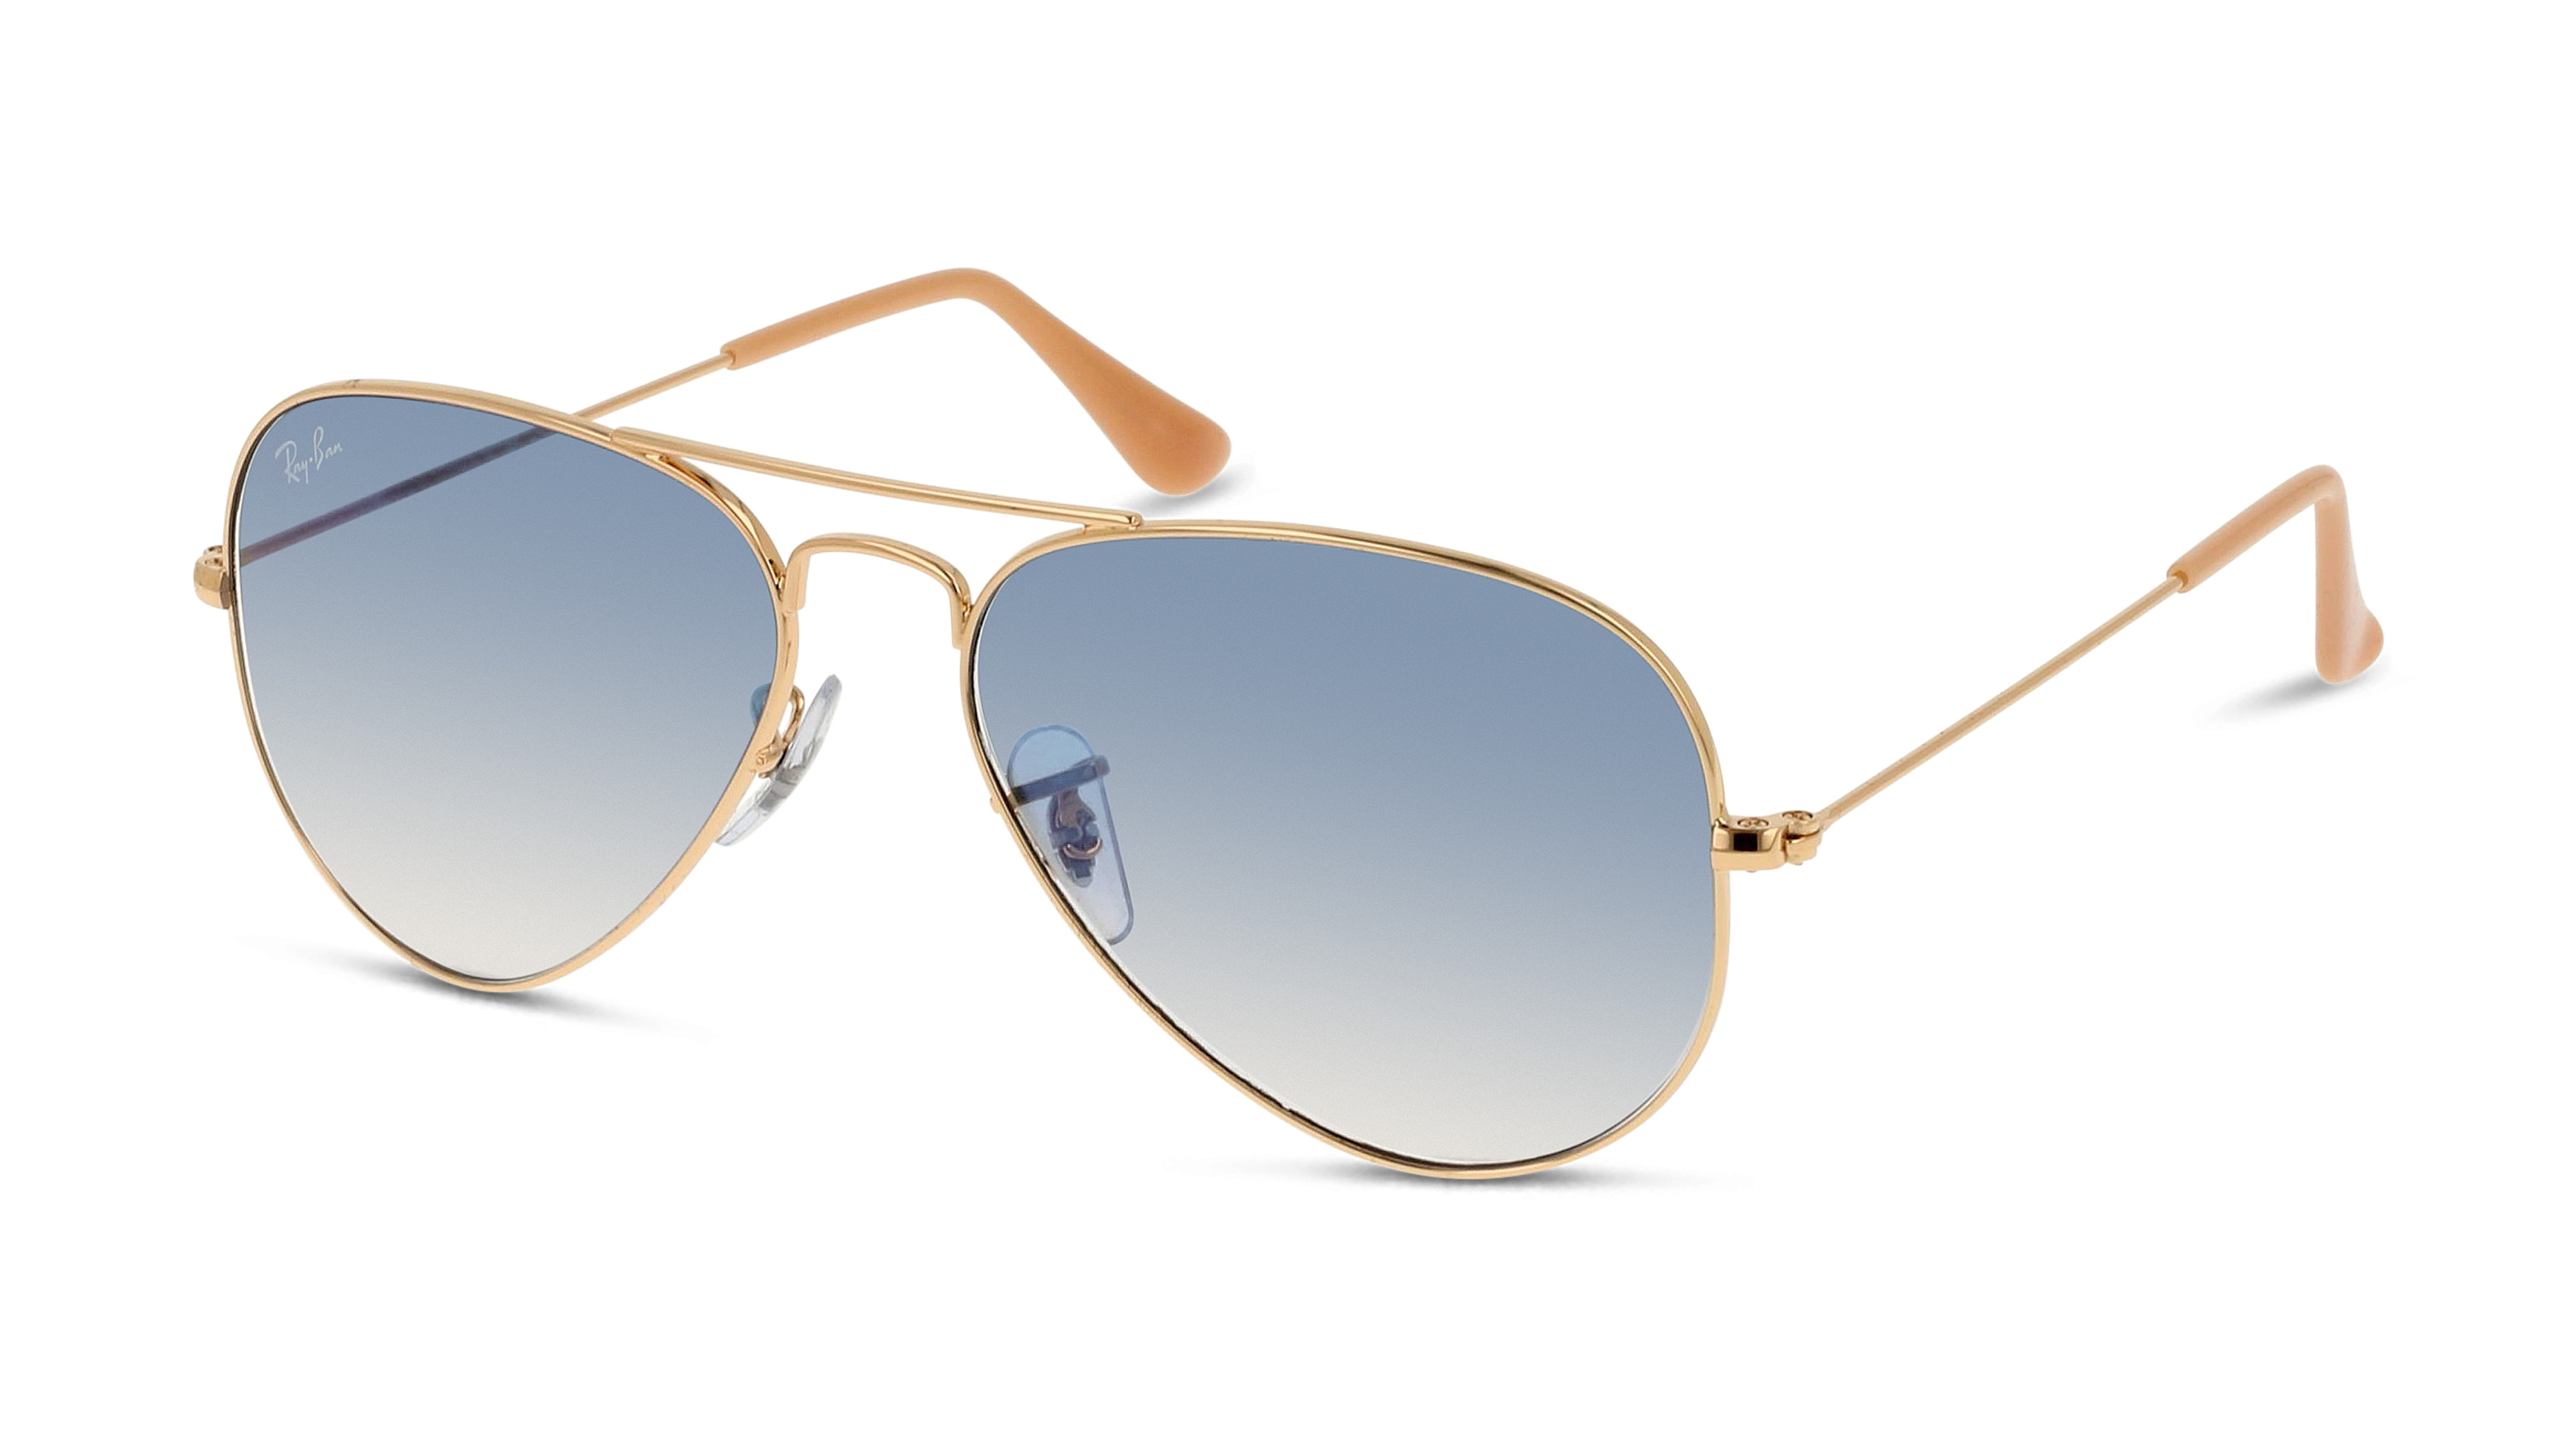 [products.image.angle_left01] Ray-Ban AVIATOR LARGE METAL 0RB3025 001/3F Sonnenbrille